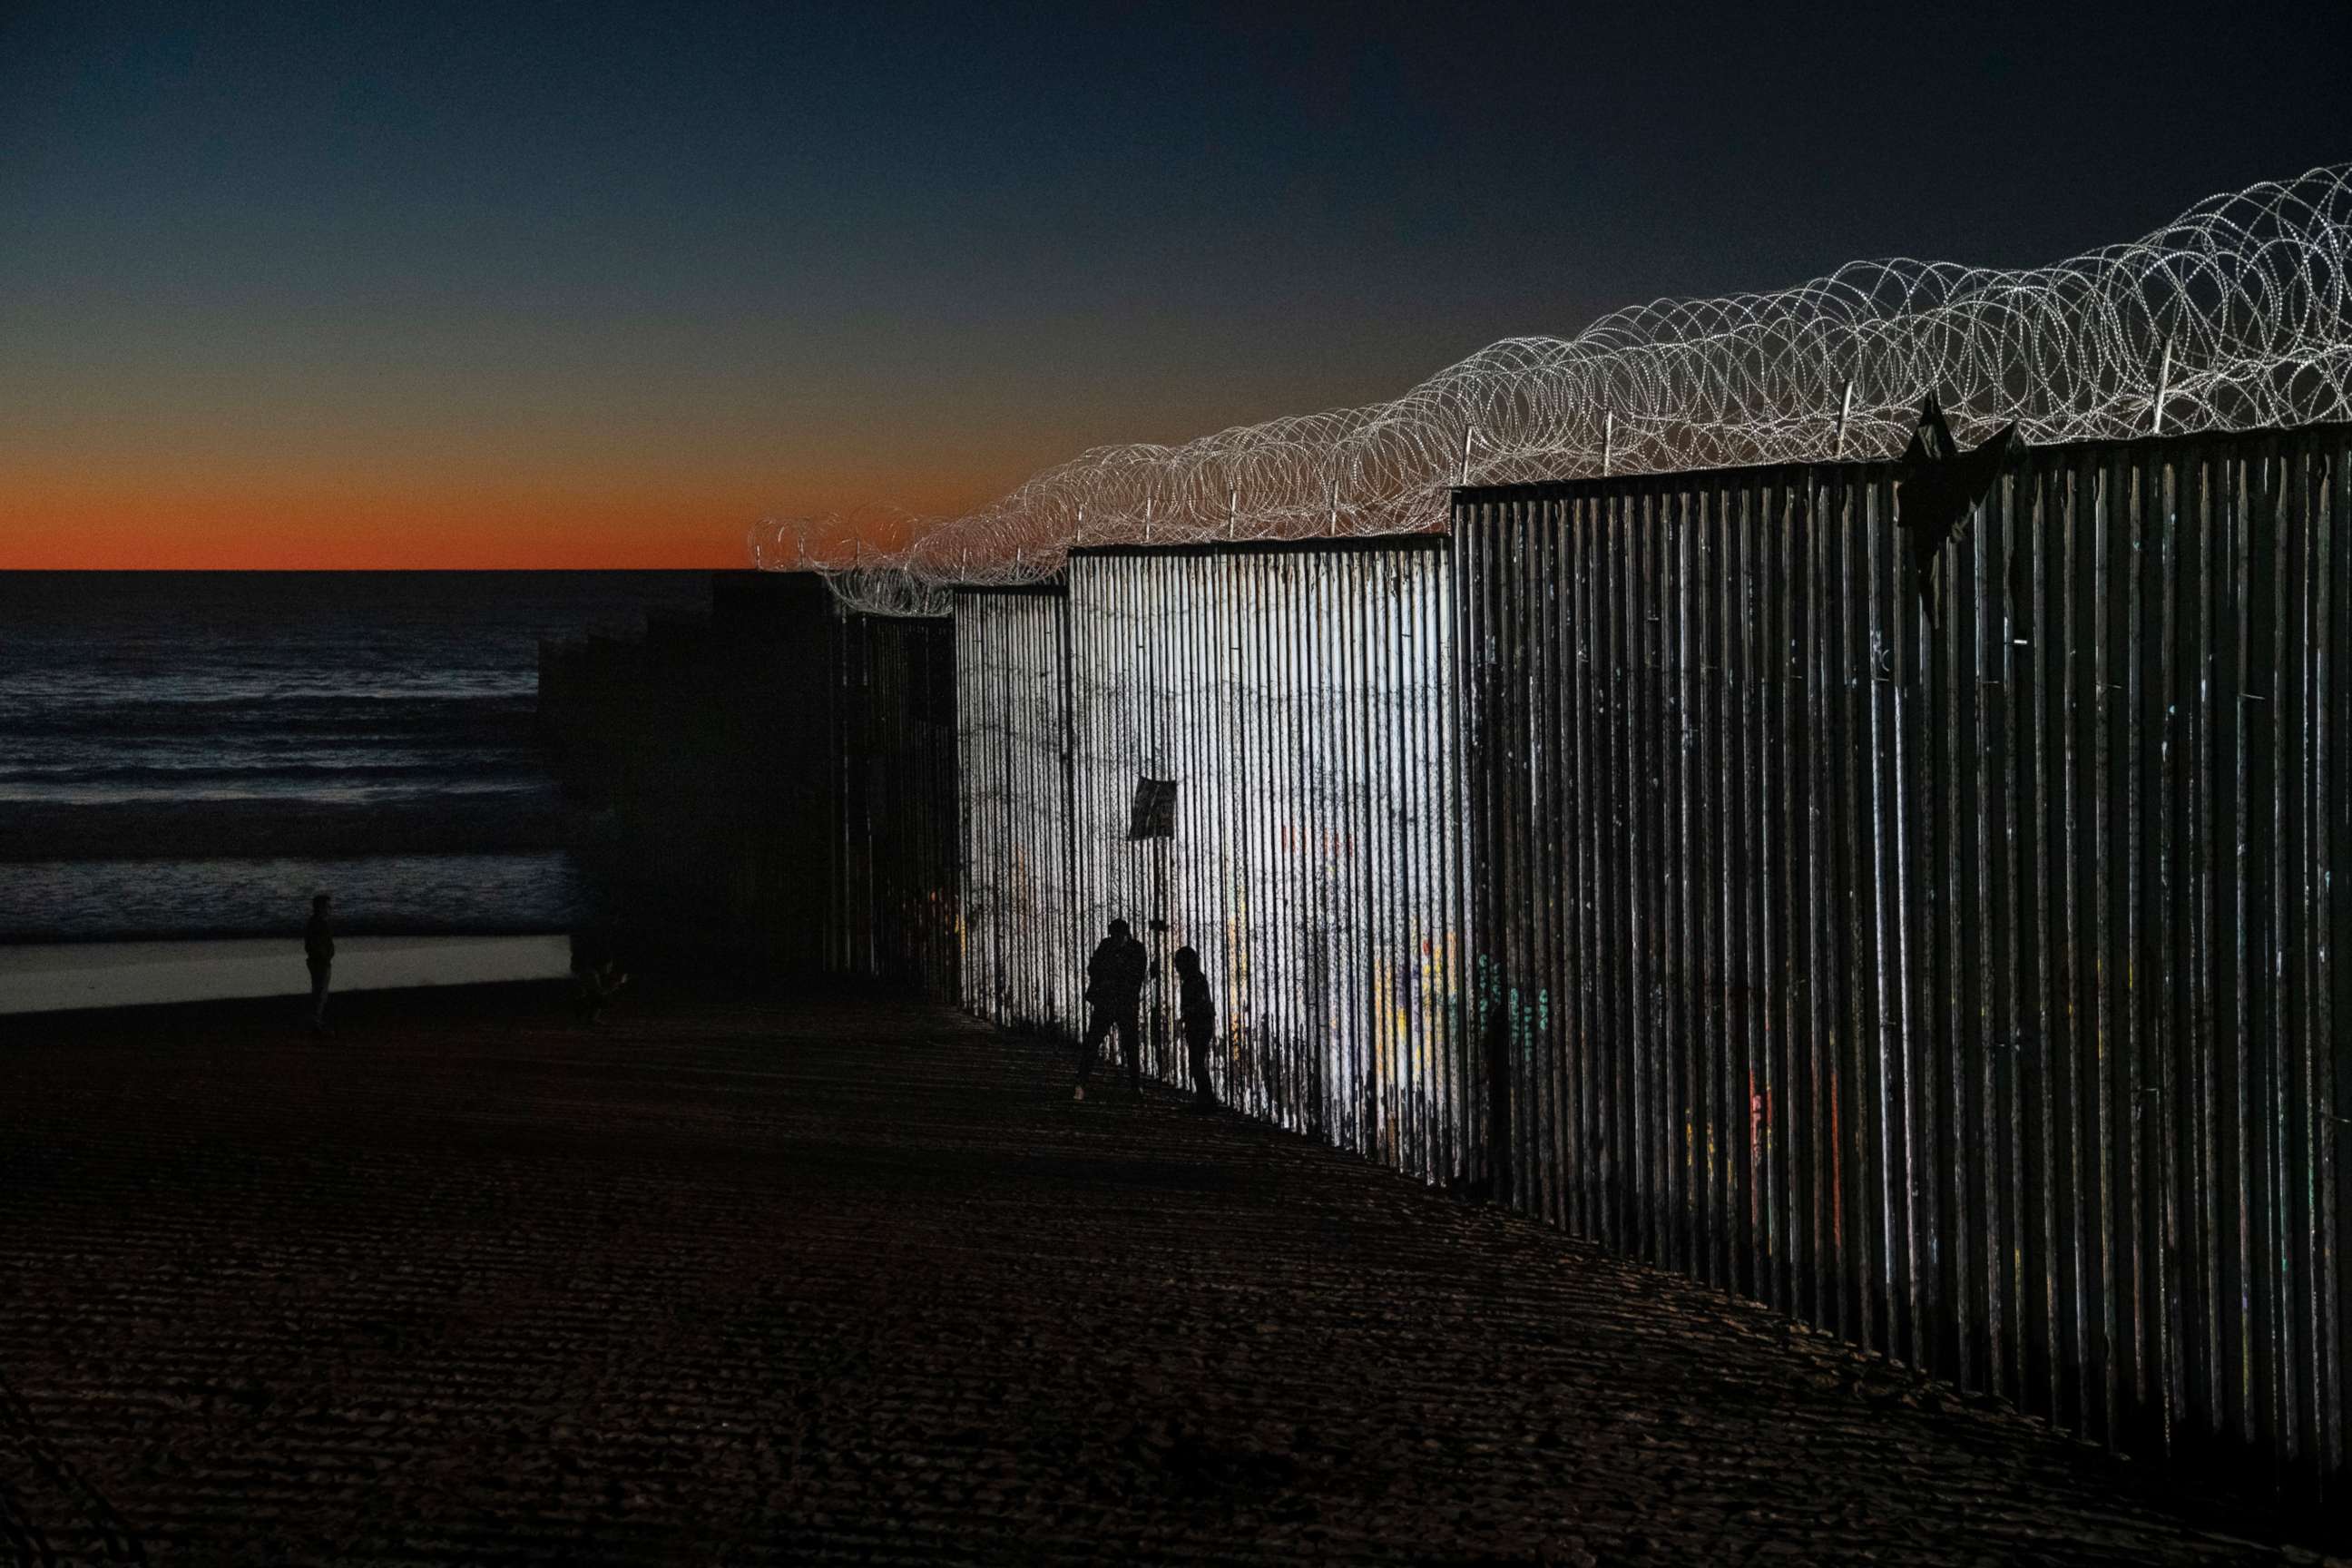 PHOTO: The sun sets while people walk close to the border fence between the U.S. side of San Diego, Calif., and Tijuana, in Mexico, Jan. 2, 2019.